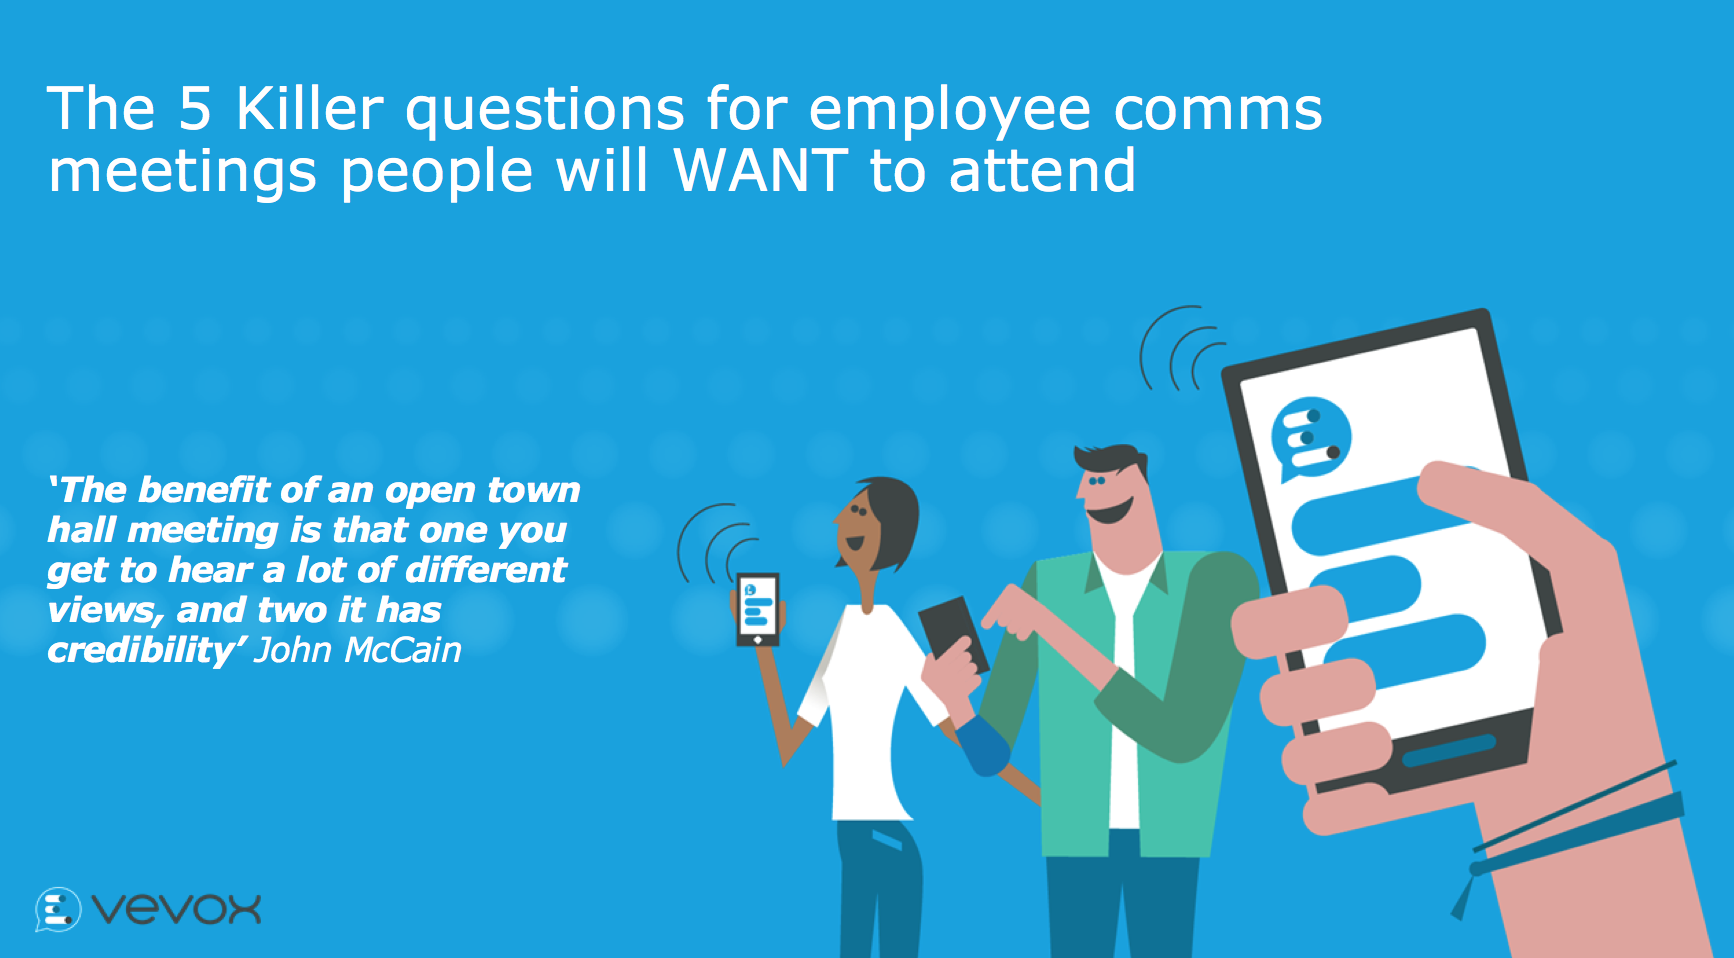 The 5 killer questions for employee comms meetings people will want to attend